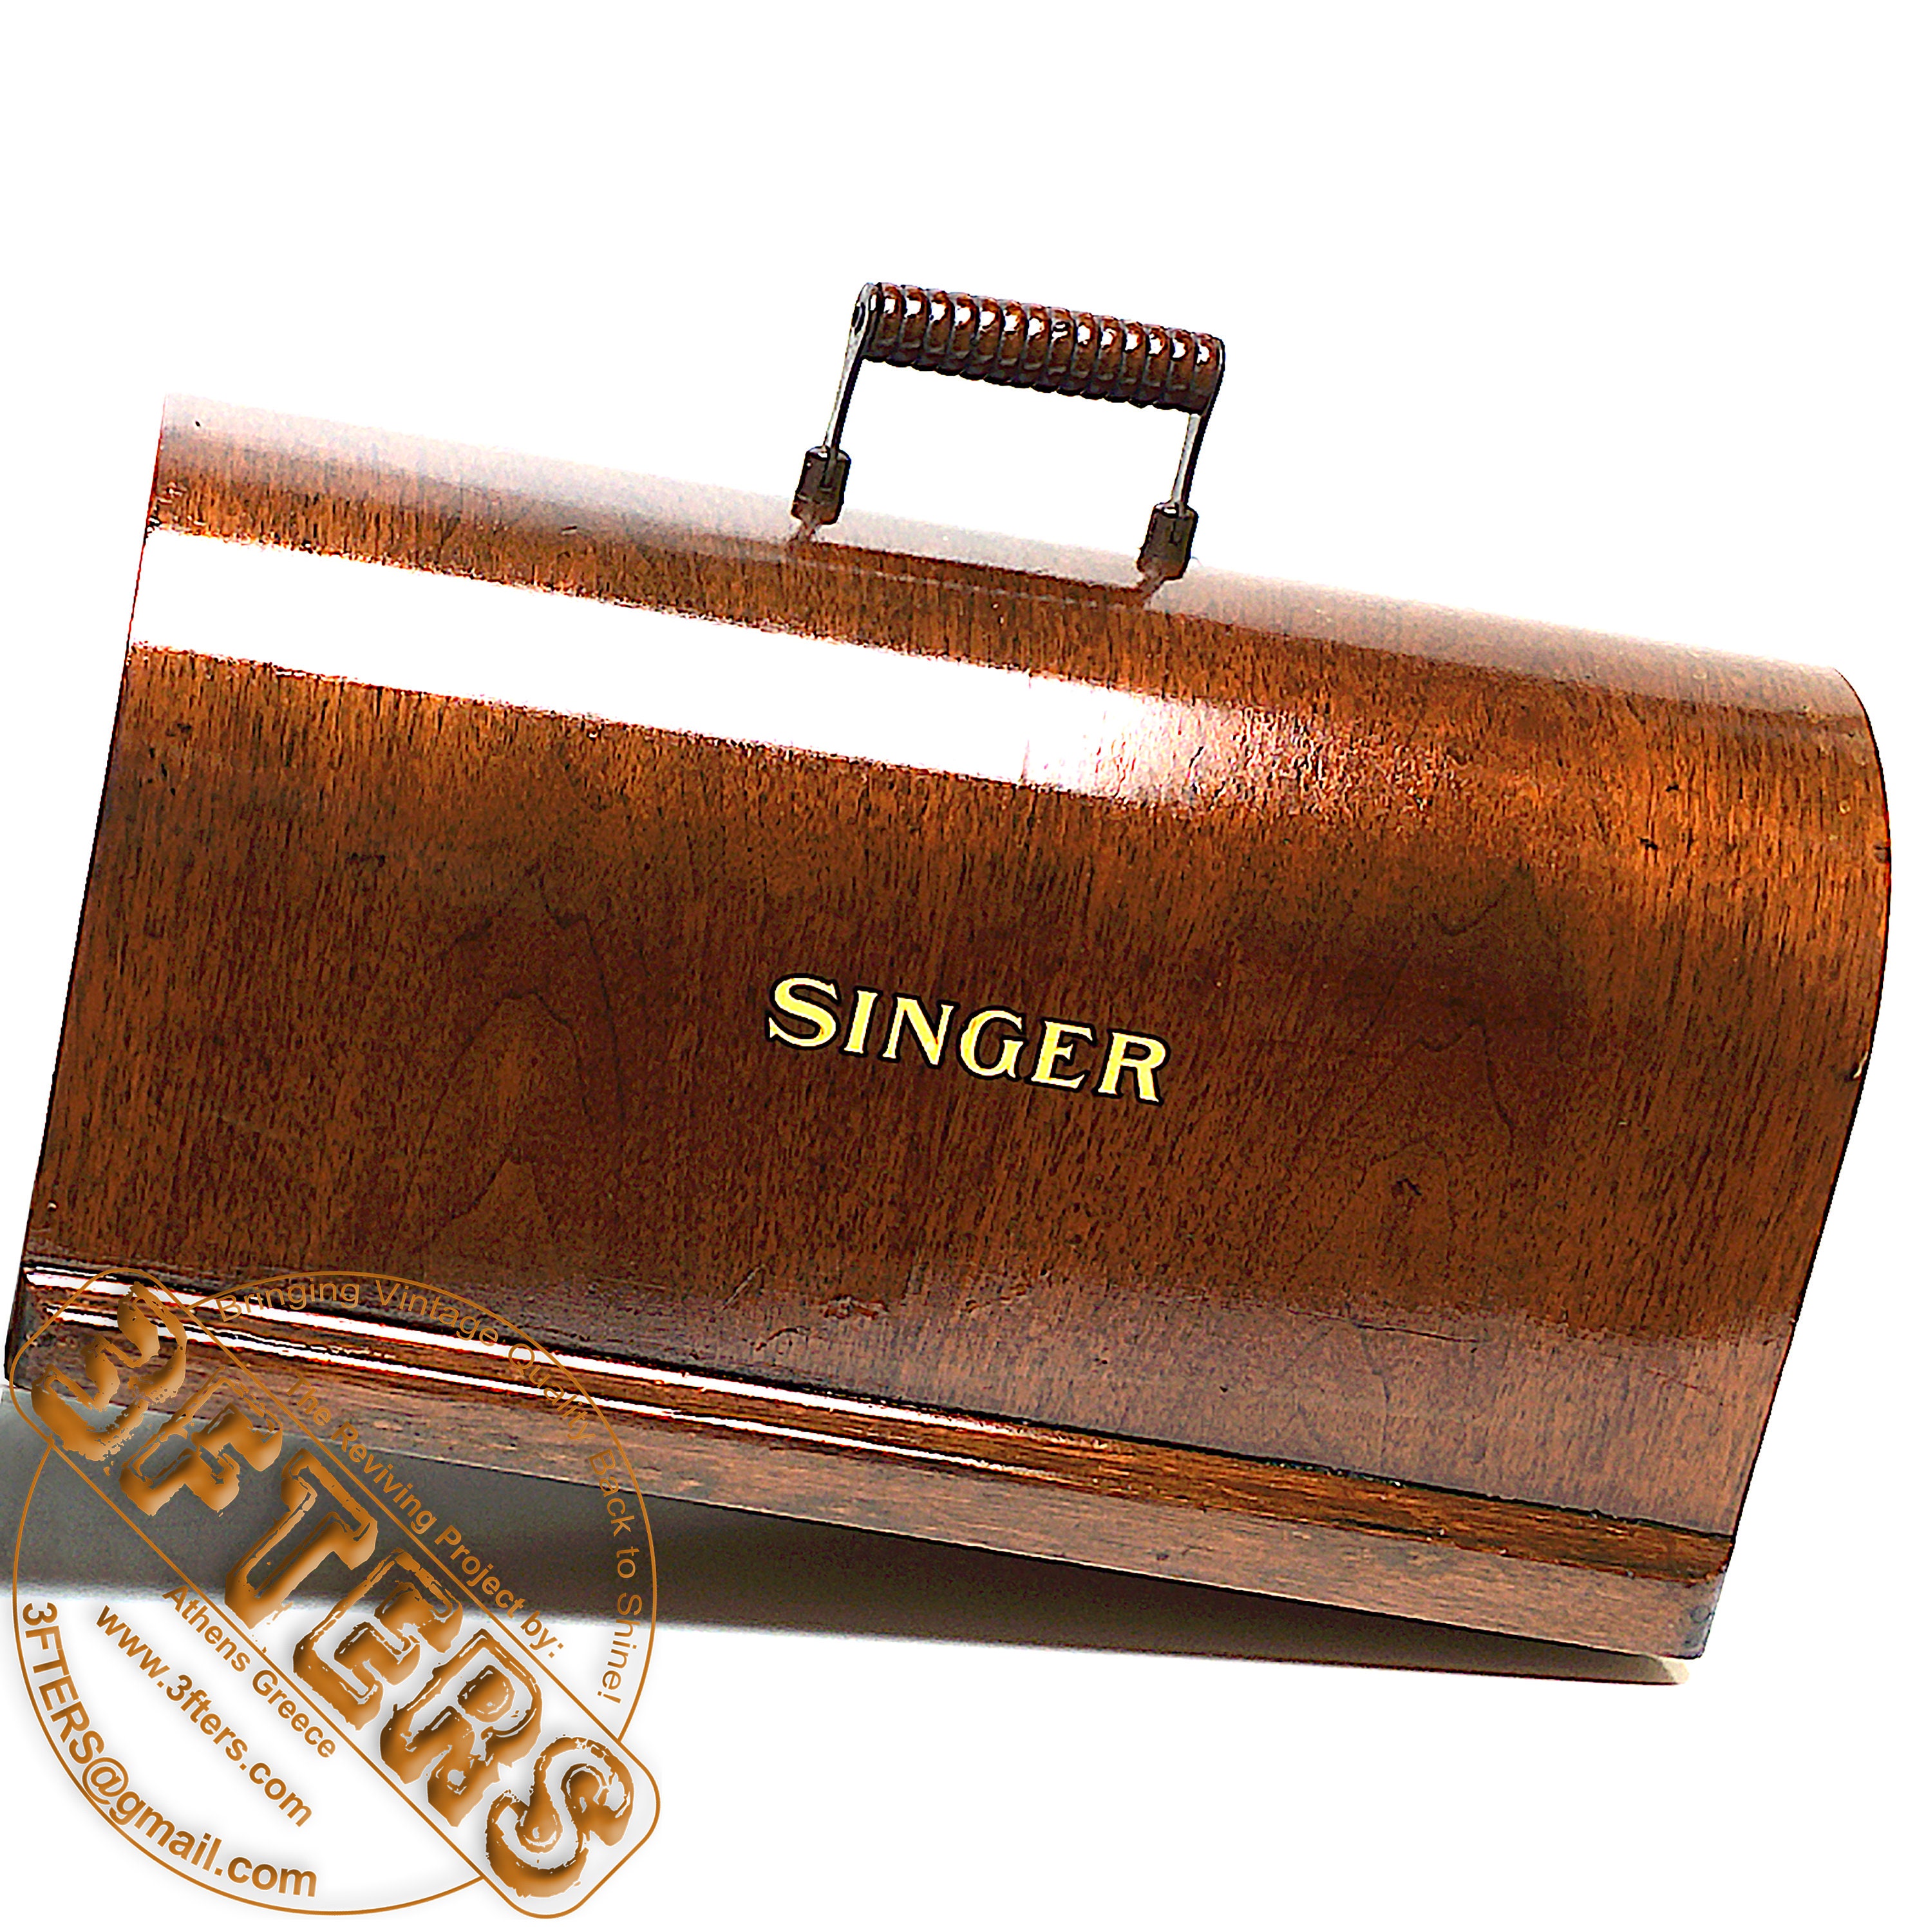 SINGER Sewing Machine Bentwood Carrying Wooden Case Top Cover Lid 99 28 128  VS-3 